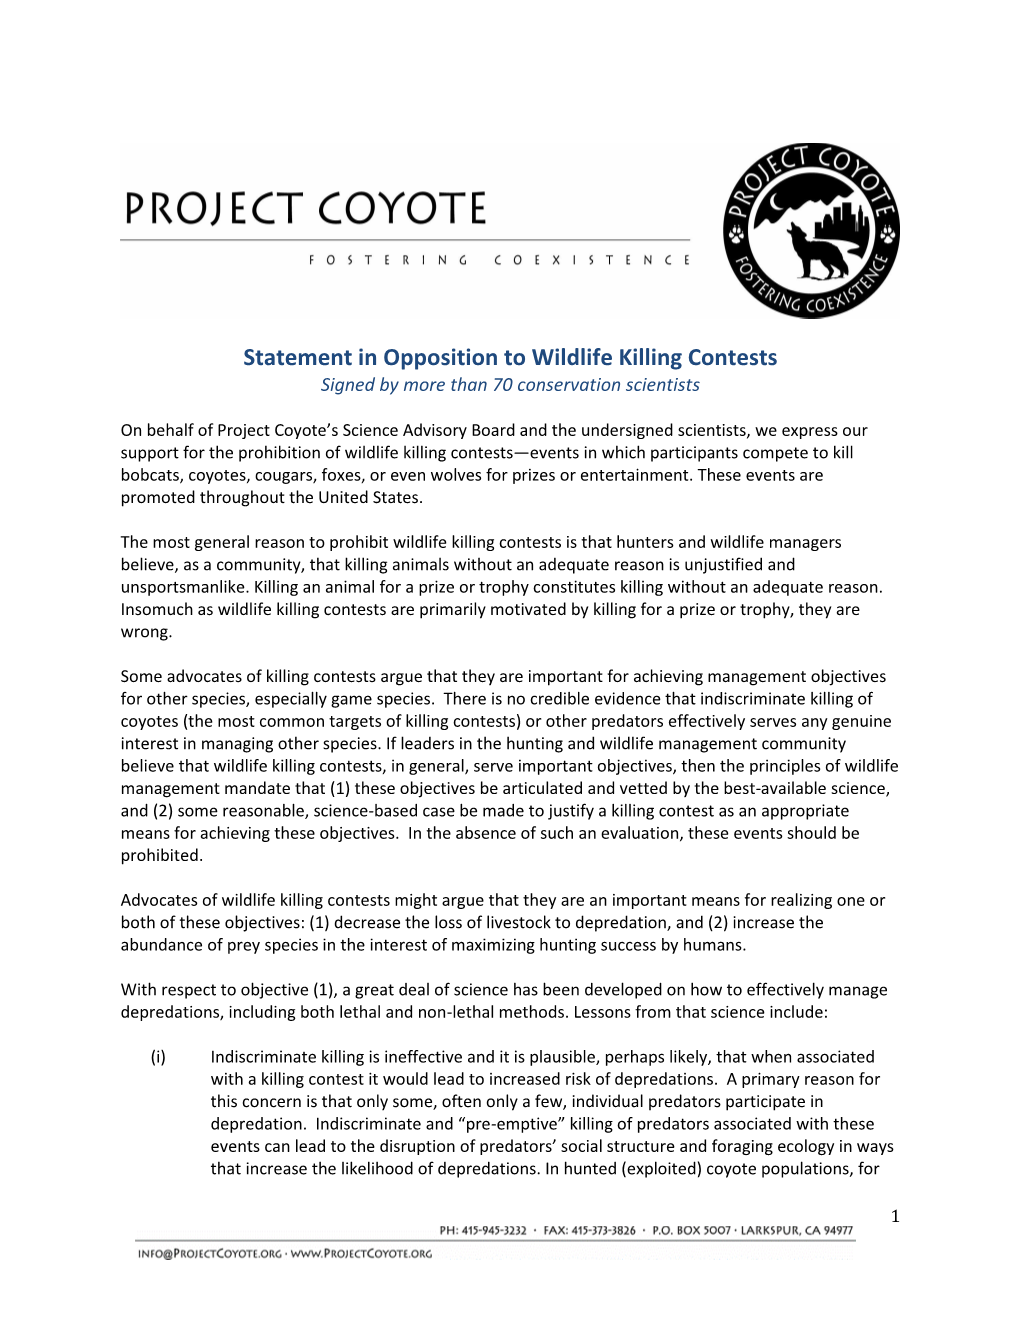 Statement in Opposition to Wildlife Killing Contests Signed by More Than 70 Conservation Scientists